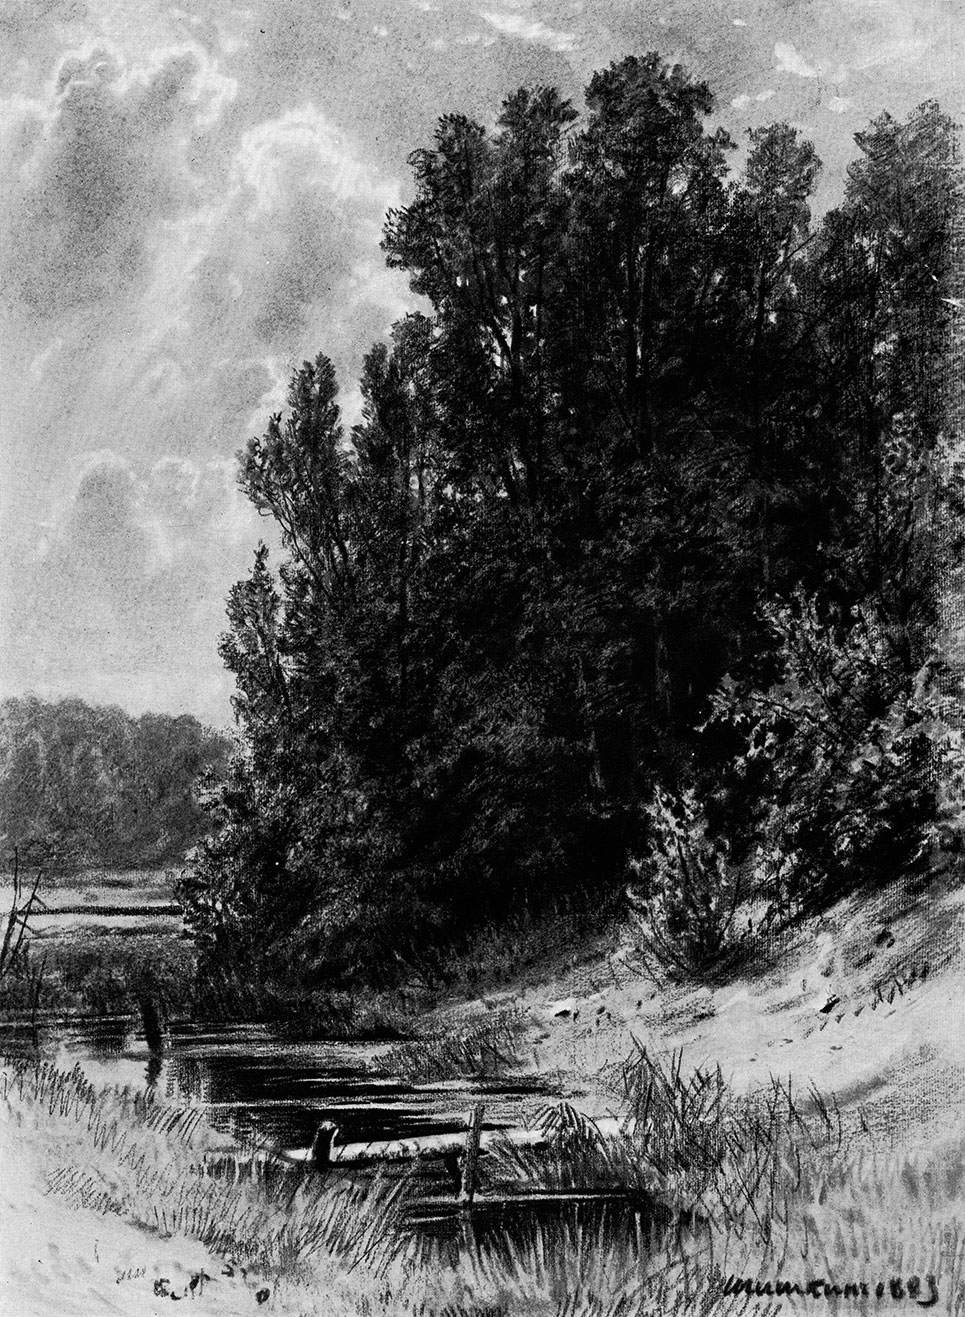 108. By the stream. 1883. Charcoal, chalk and white on tinted paper, mounted on cardboard. 59.2X45.1 cm. The Russian Museum, Leningrad